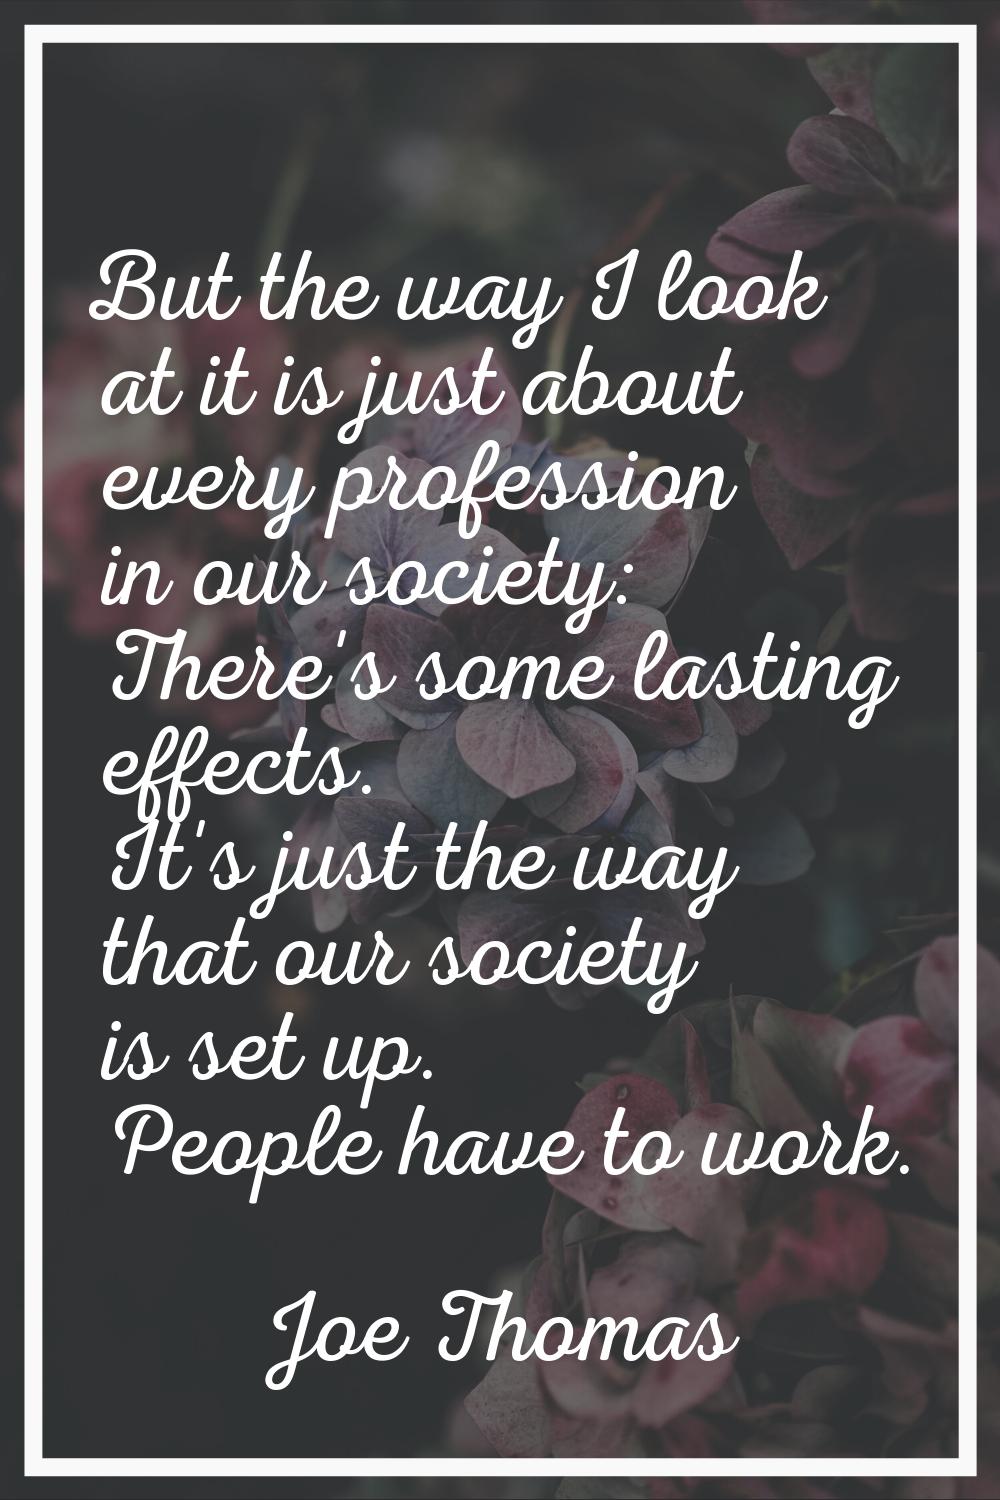 But the way I look at it is just about every profession in our society: There's some lasting effect